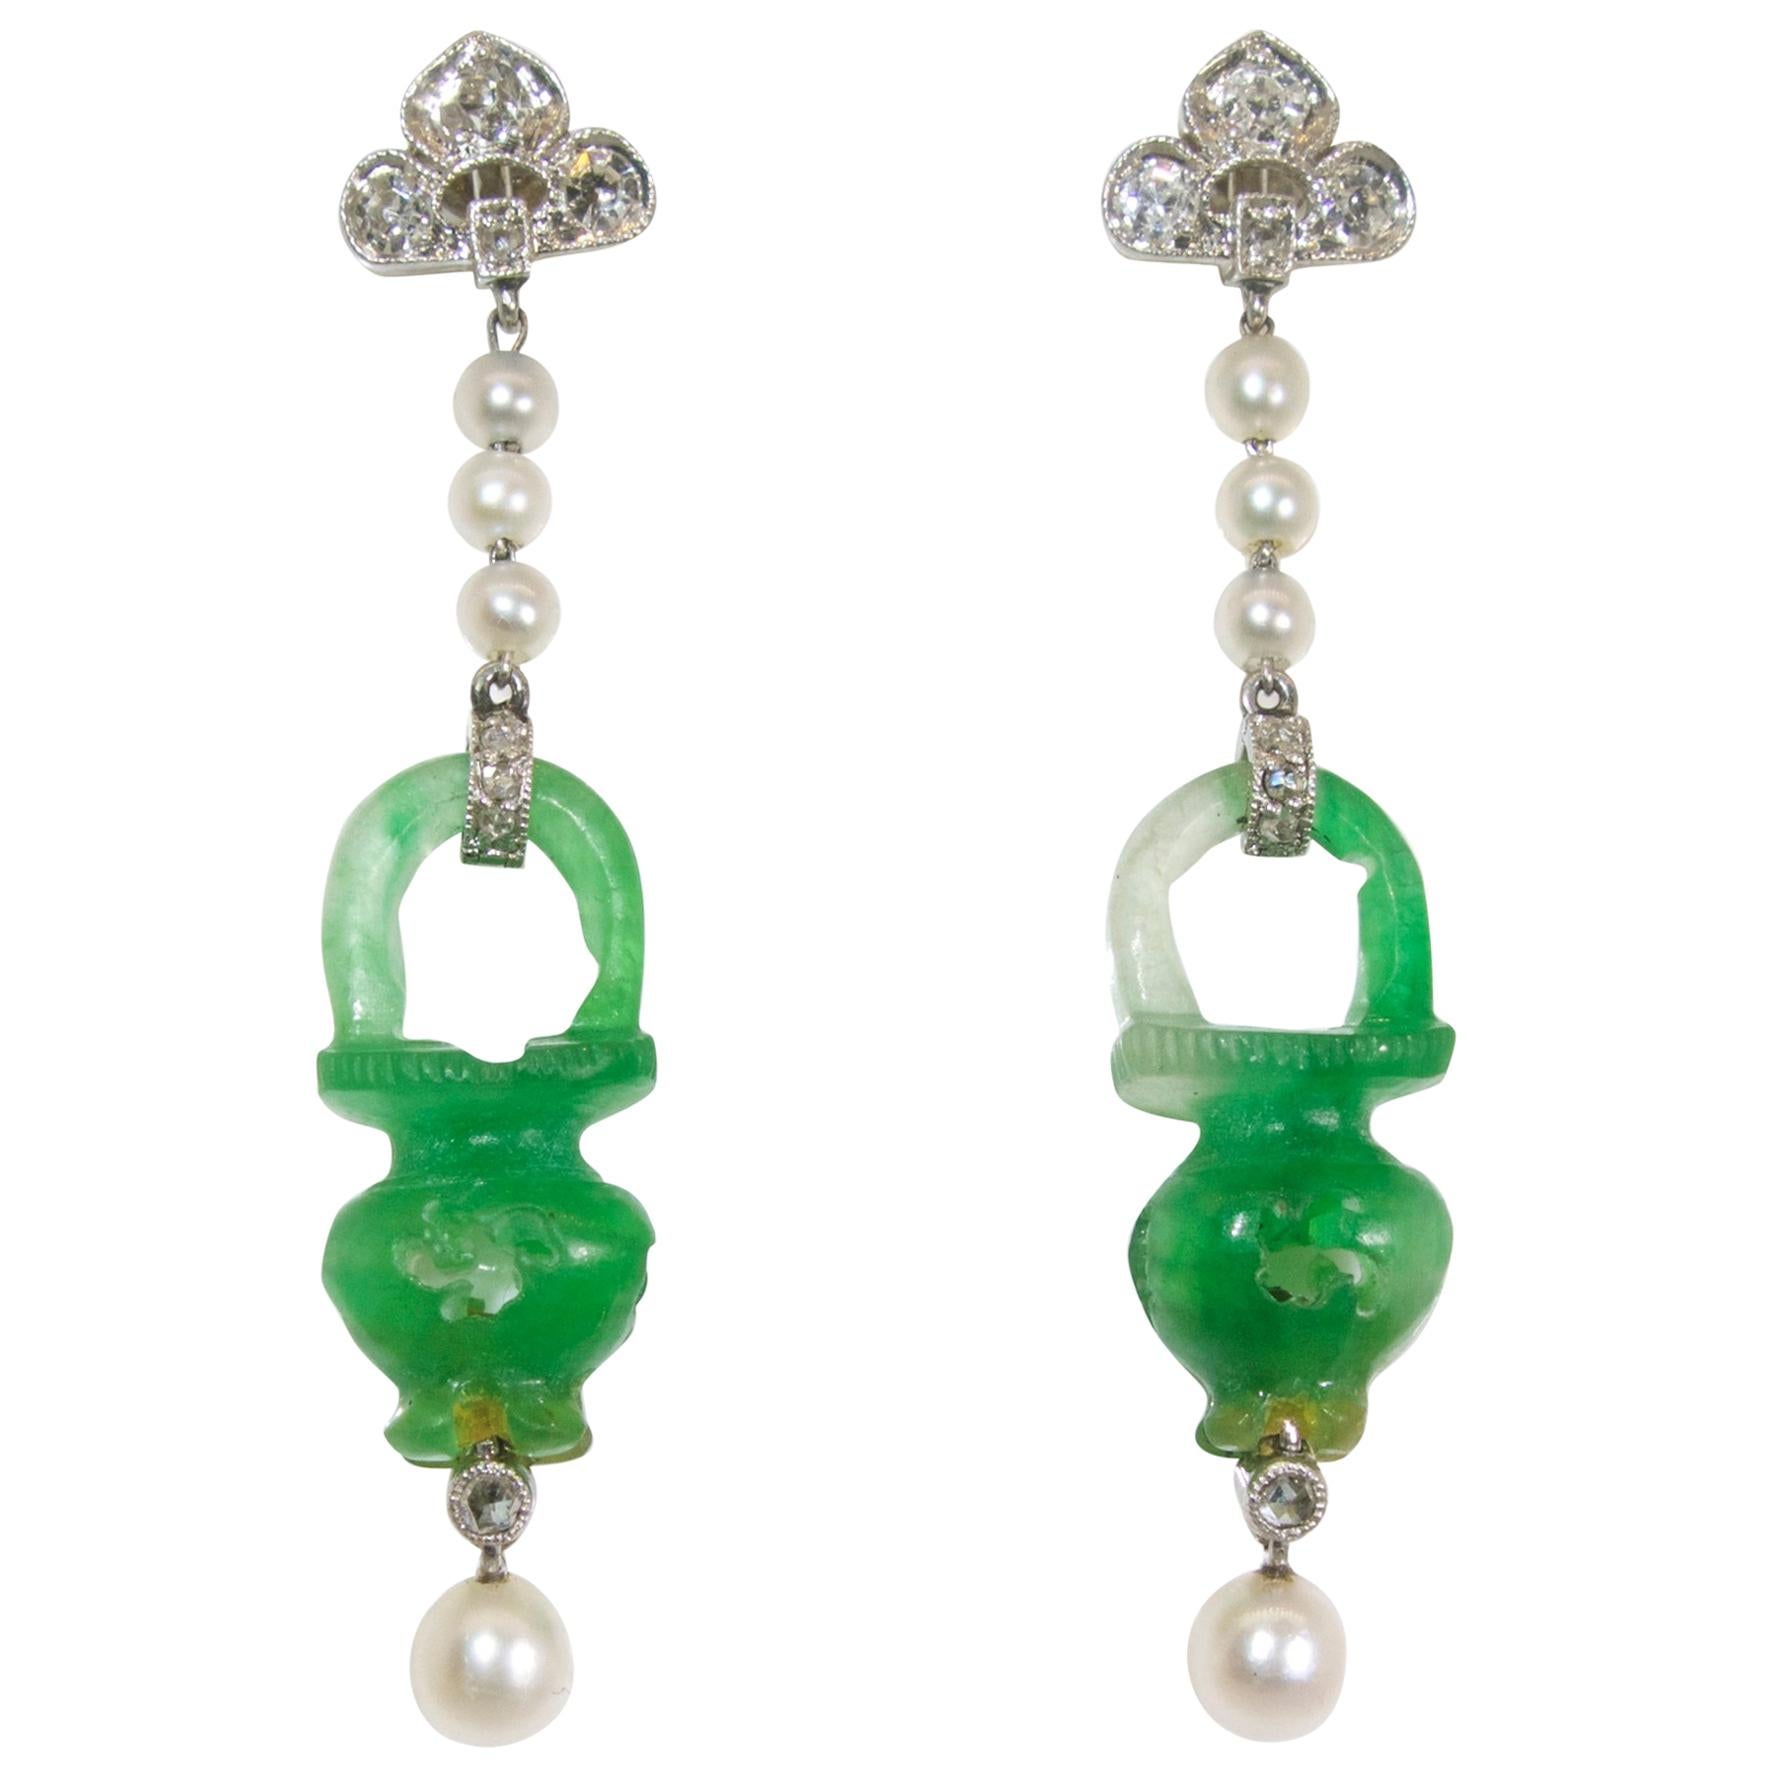 Earrings suspending natural jadeite jade (accompanied by a certificate) carved in an urn motif in round.  The delicate earrings are platinum with eight natural pearls and 22 small old cut and rose cut diamonds.  These delicate earrings, in fine